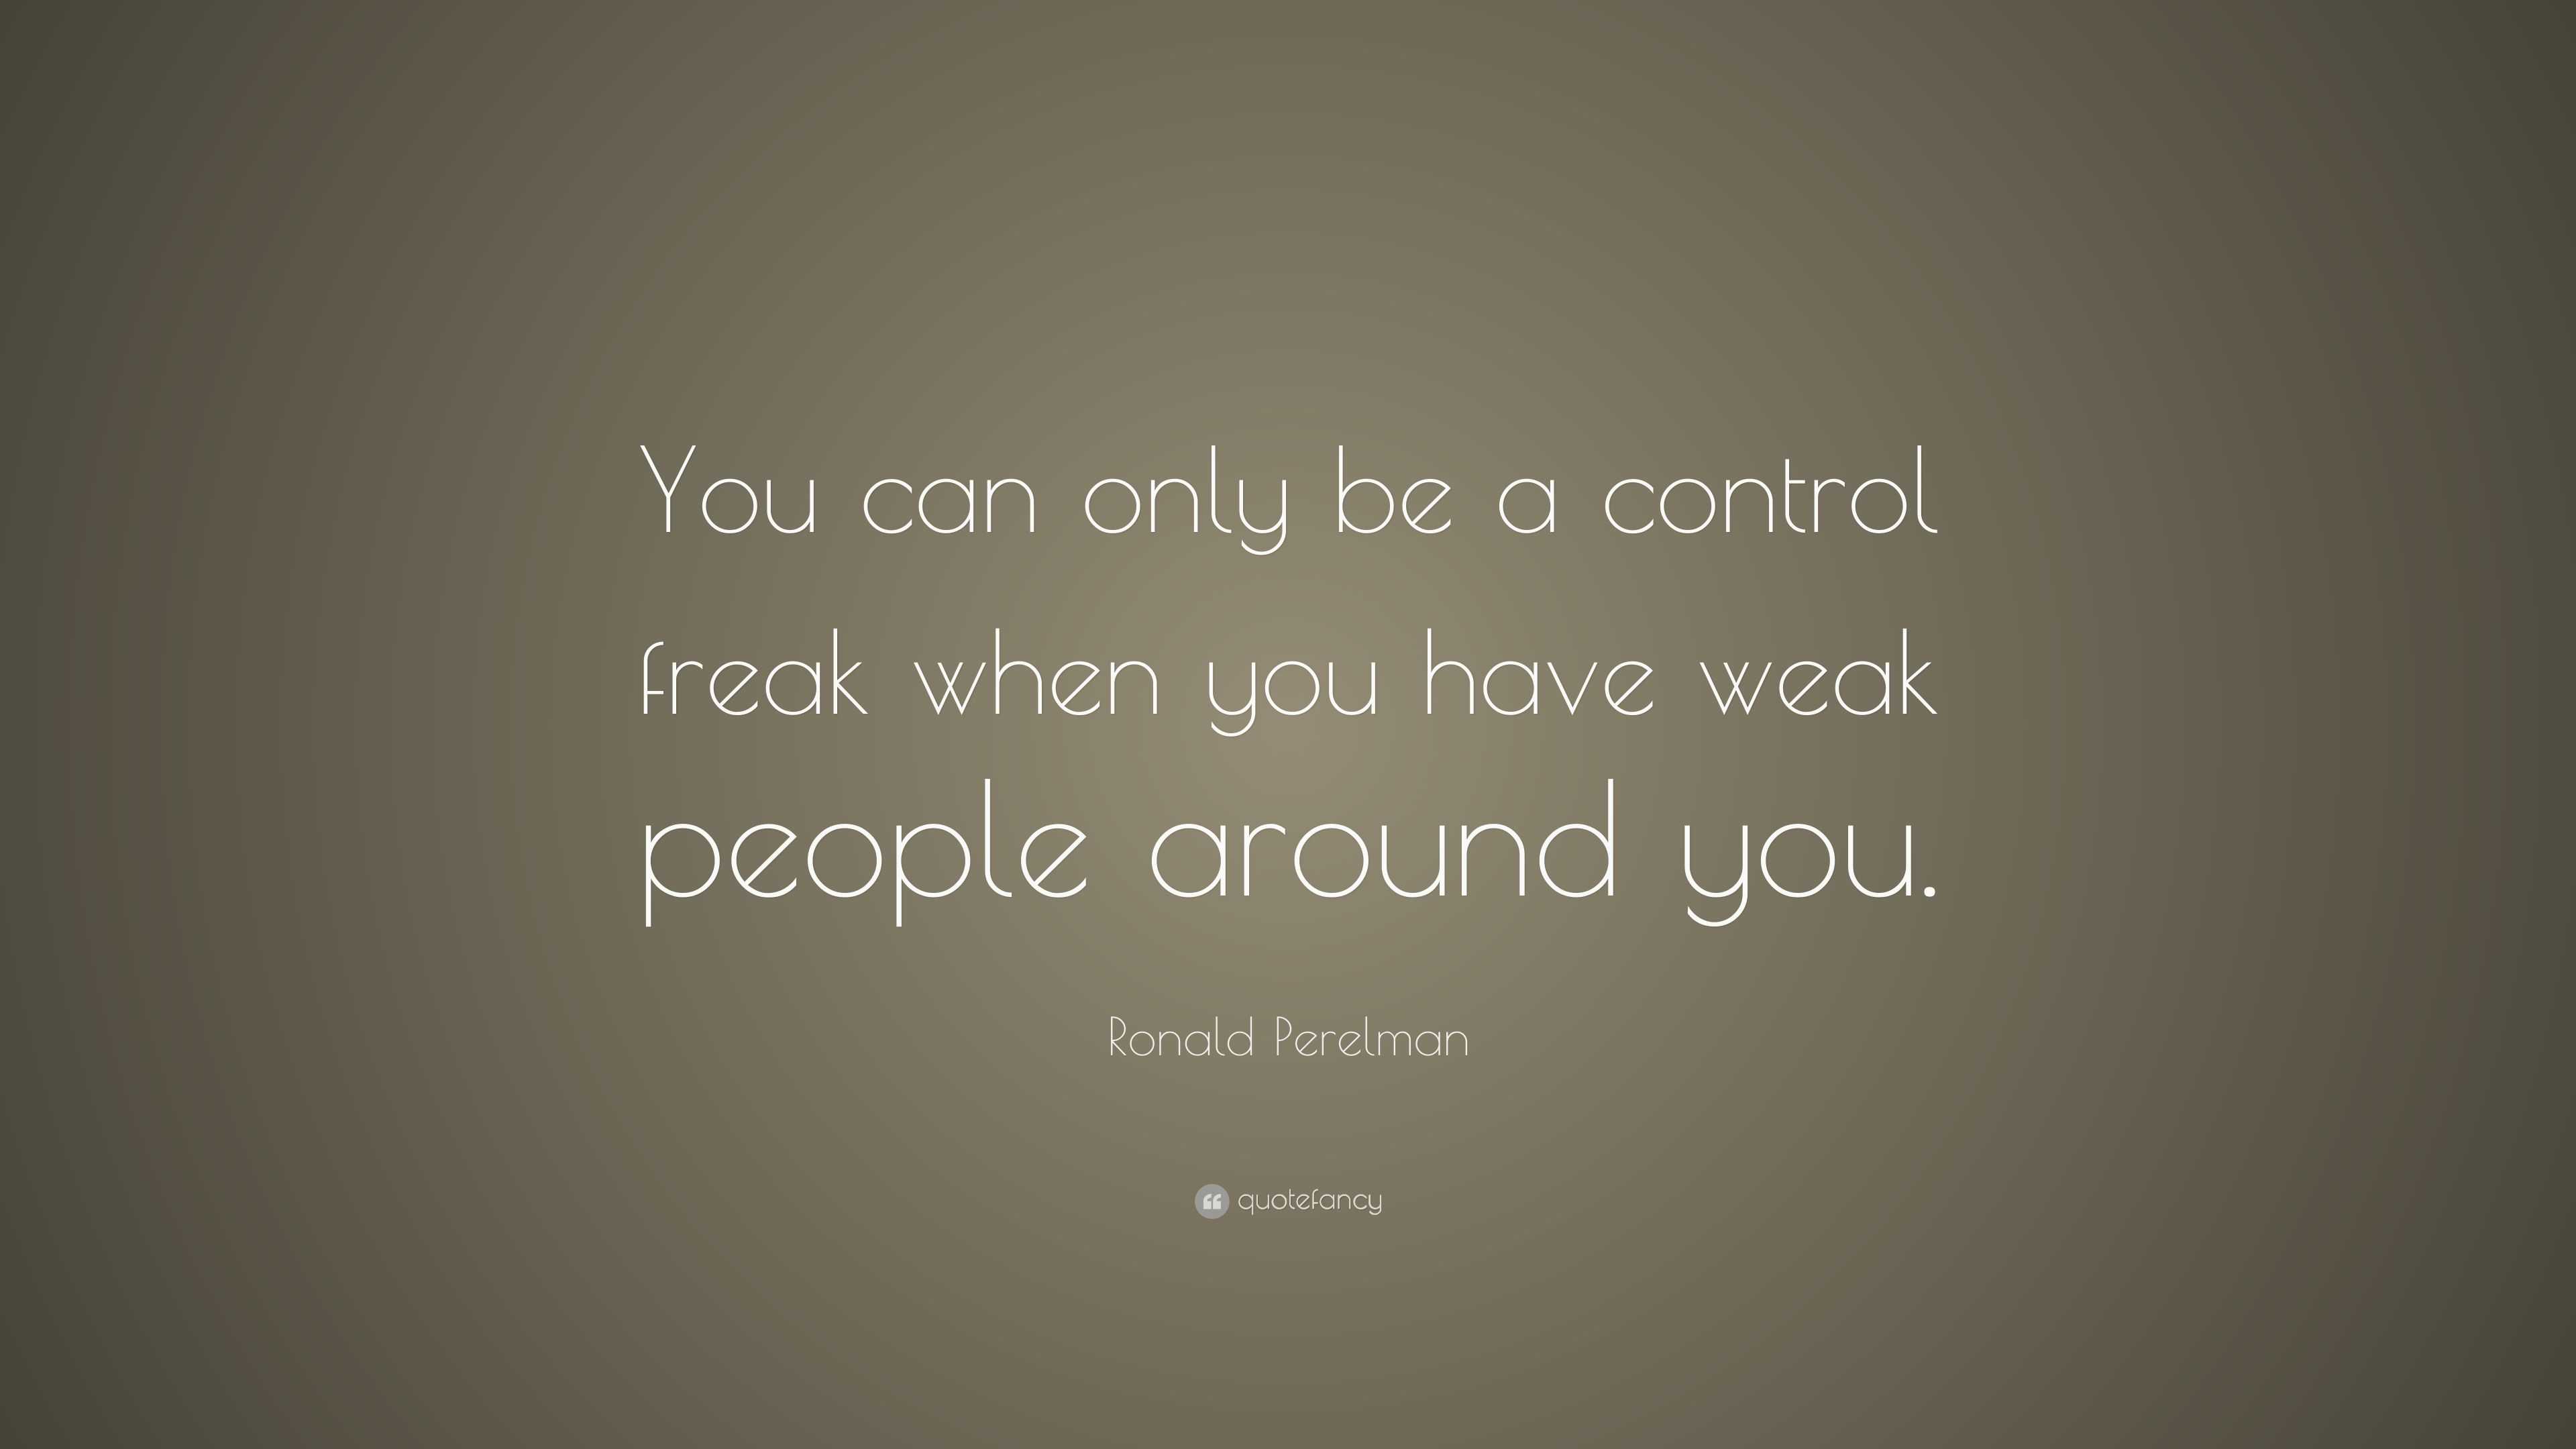 Ronald Perelman Quote: “You can only be a control freak when you have ...